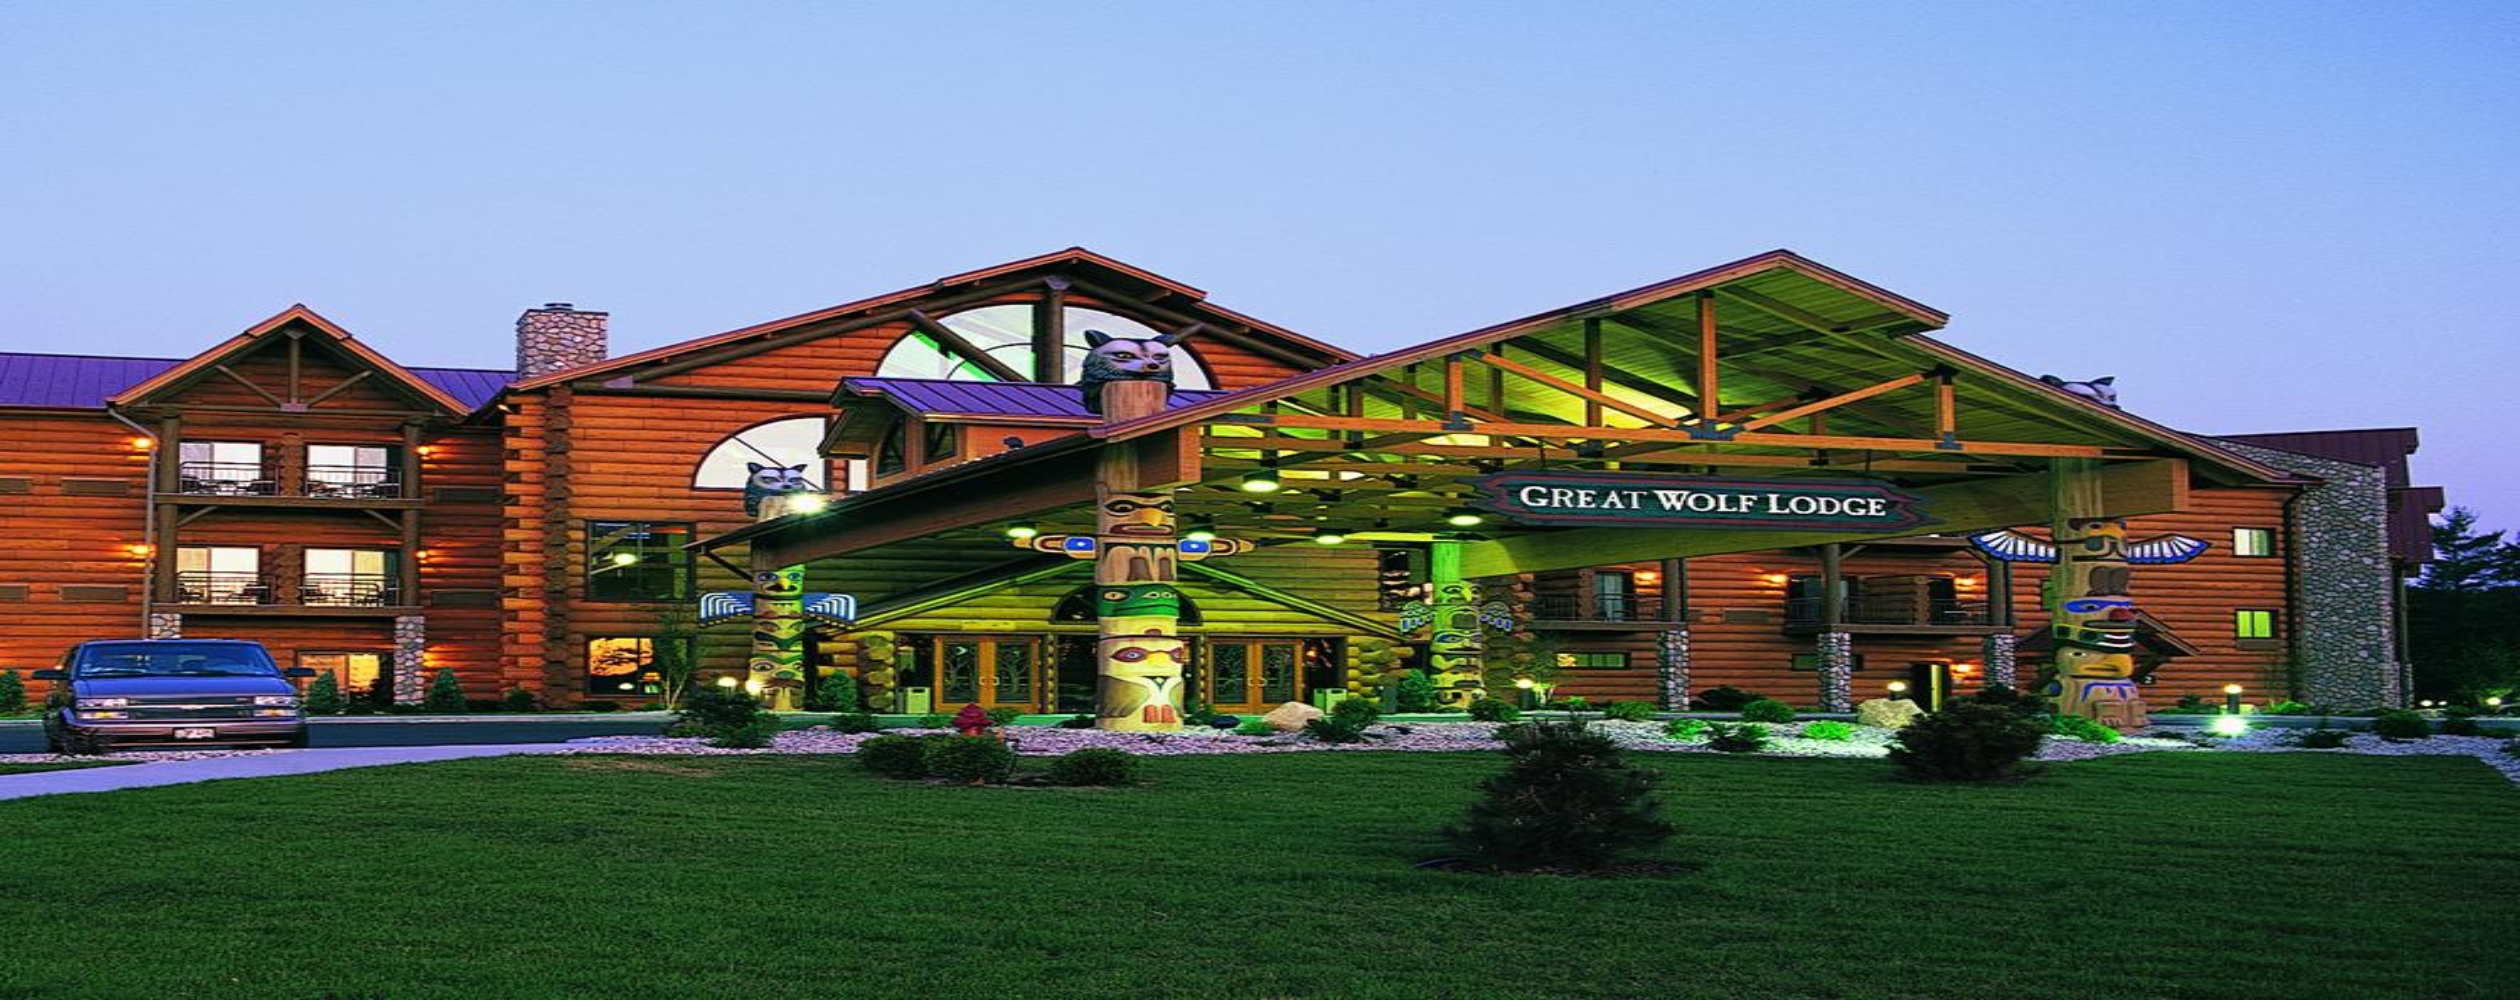 great wolf lodge wisconsin dells pictures